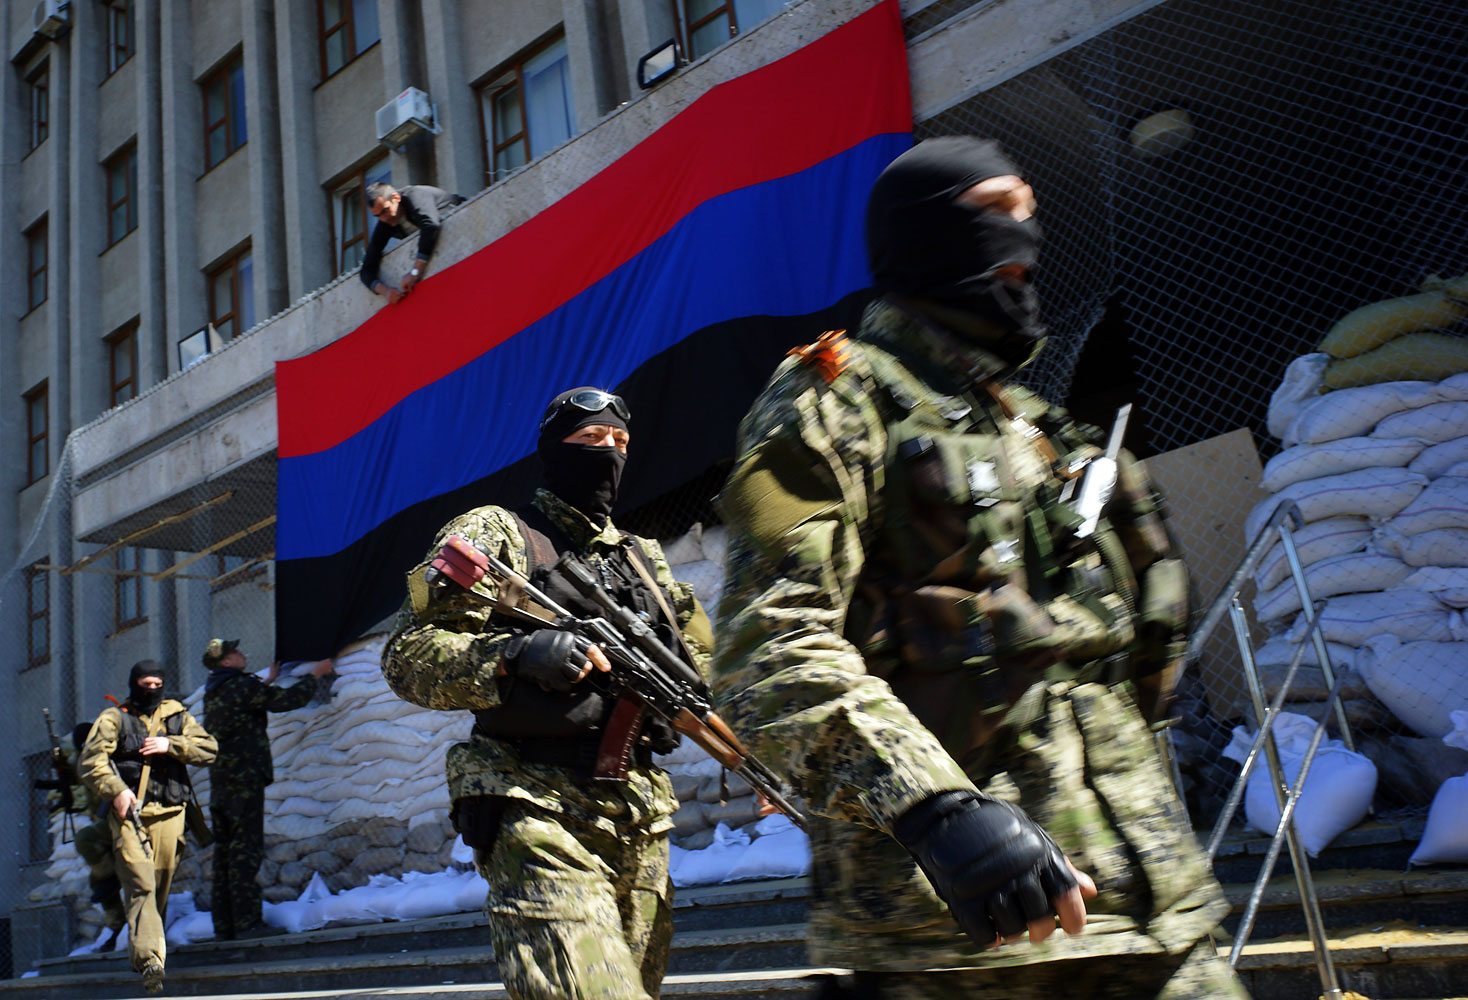 A pro-Russia activist hangs a flag of the so-called "People's Republic of Donetsk" on the regional administration building seized by separatists as armed men in military fatigues guard the premises in the eastern Ukrainian city of Slavyansk on April 21, 2014. (Genya Savilov—AFP/Getty Images)